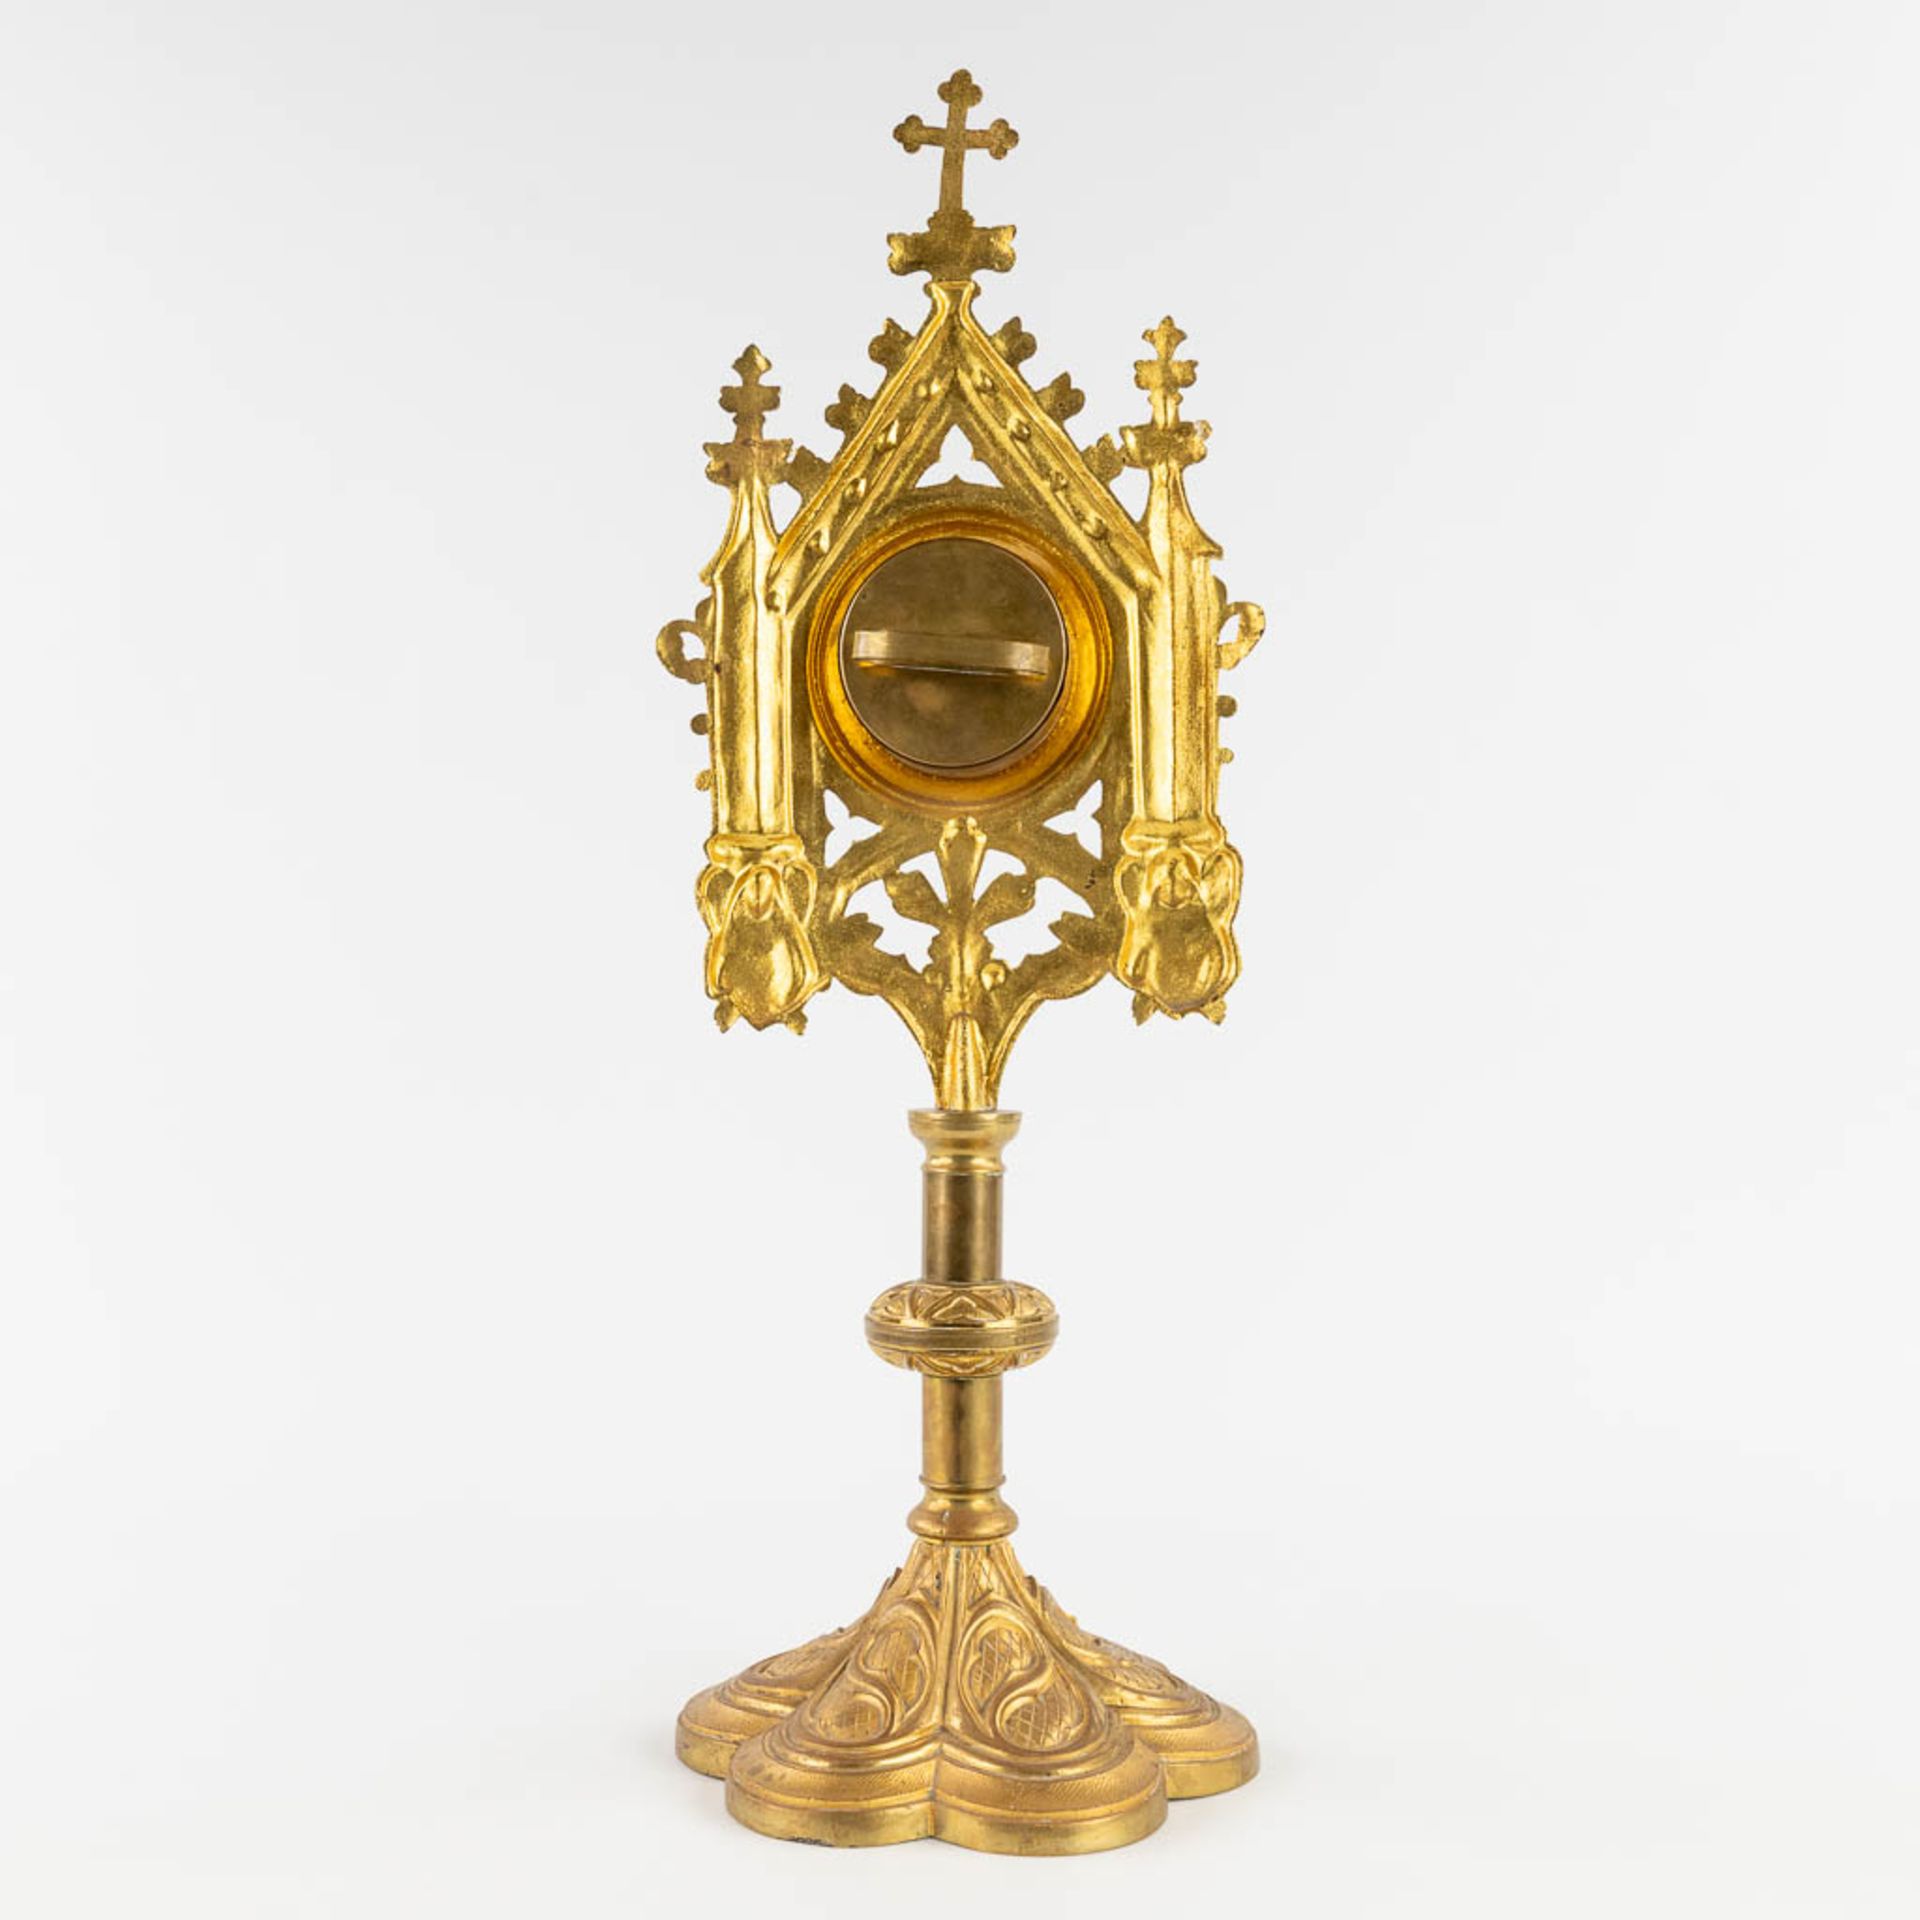 A sealed theca with relic 'De Spongia DNJC' in a bronze monstrance in a gothic revival style. 1858. - Image 5 of 17